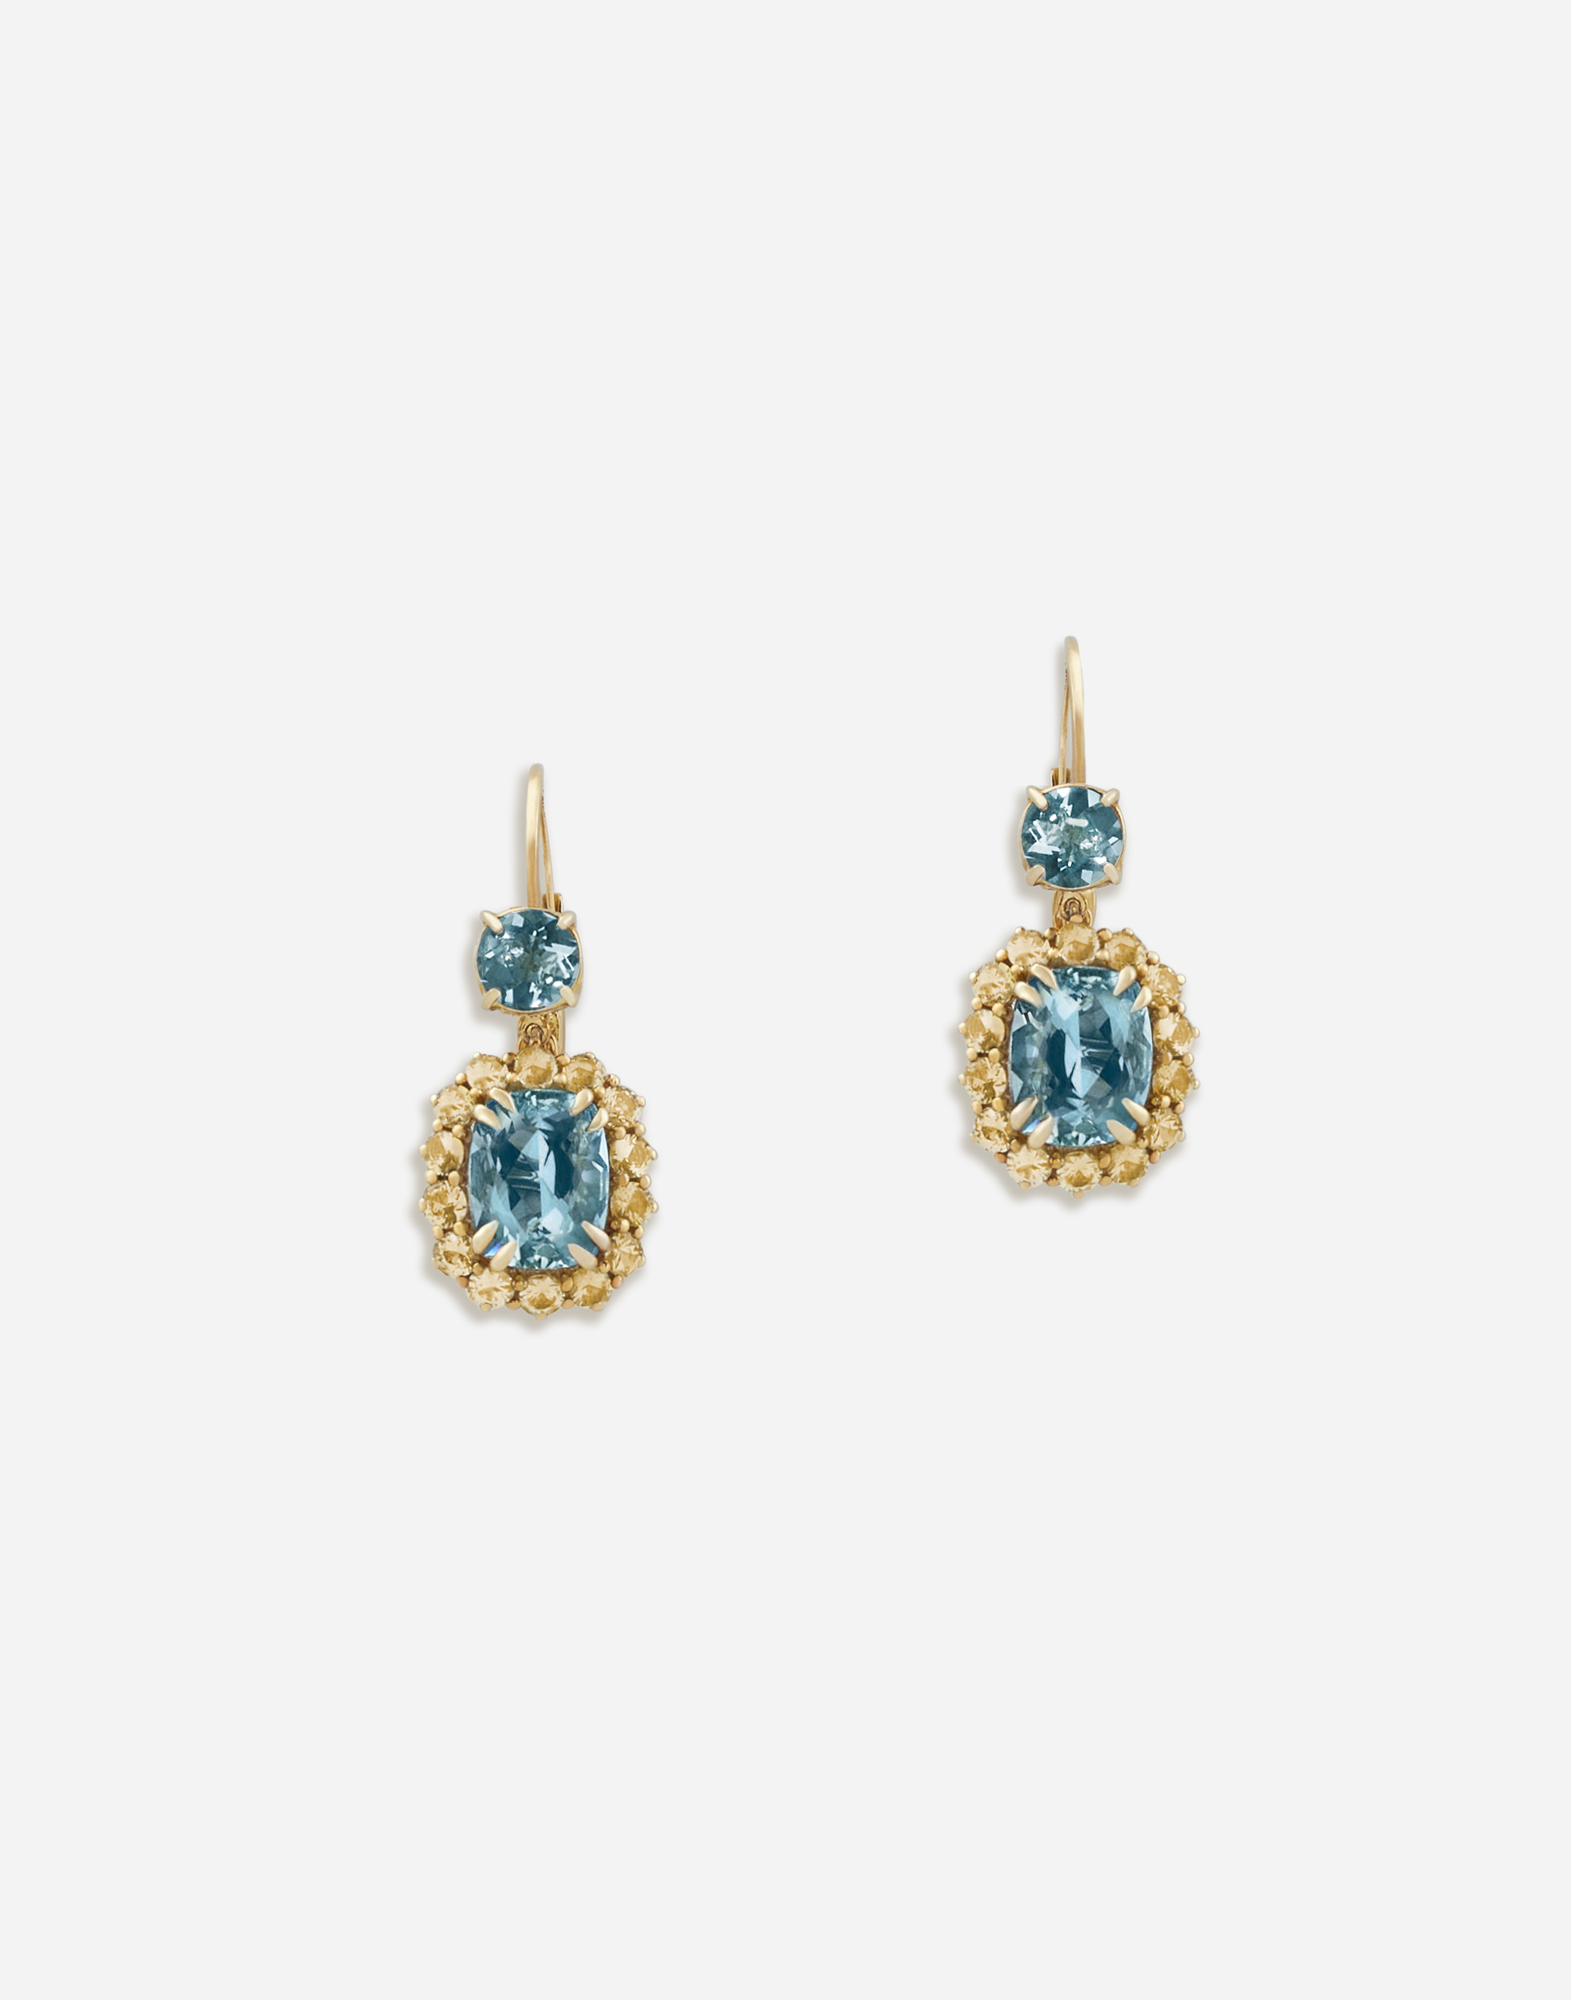 Herritage earrings in yellow gold with aquamarines and yellow sapphires in Gold